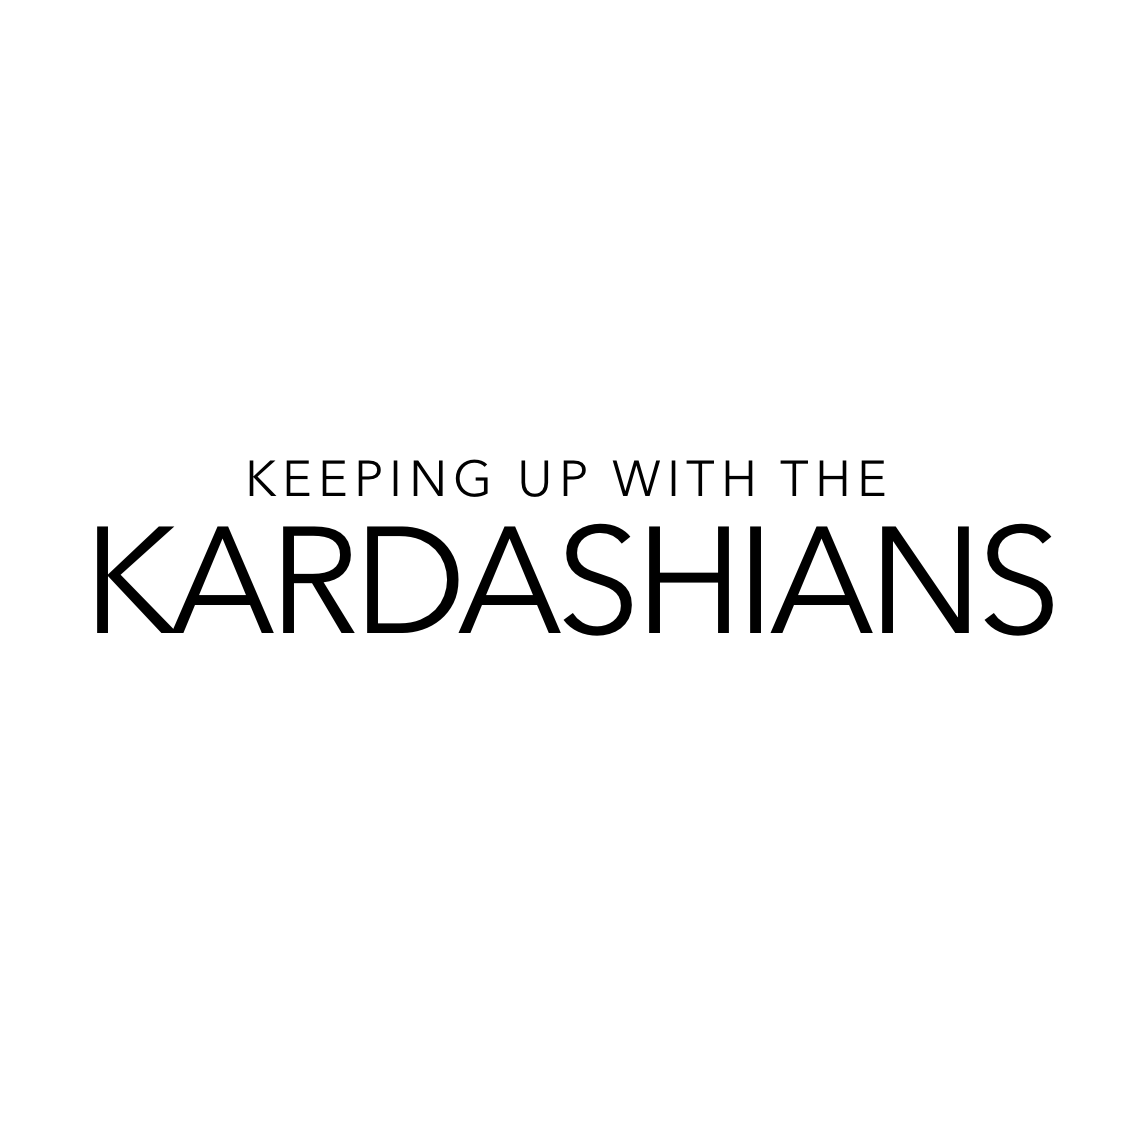 What happened in the latest Keeping Up with the Kardashians episode? Who gets betrayed?